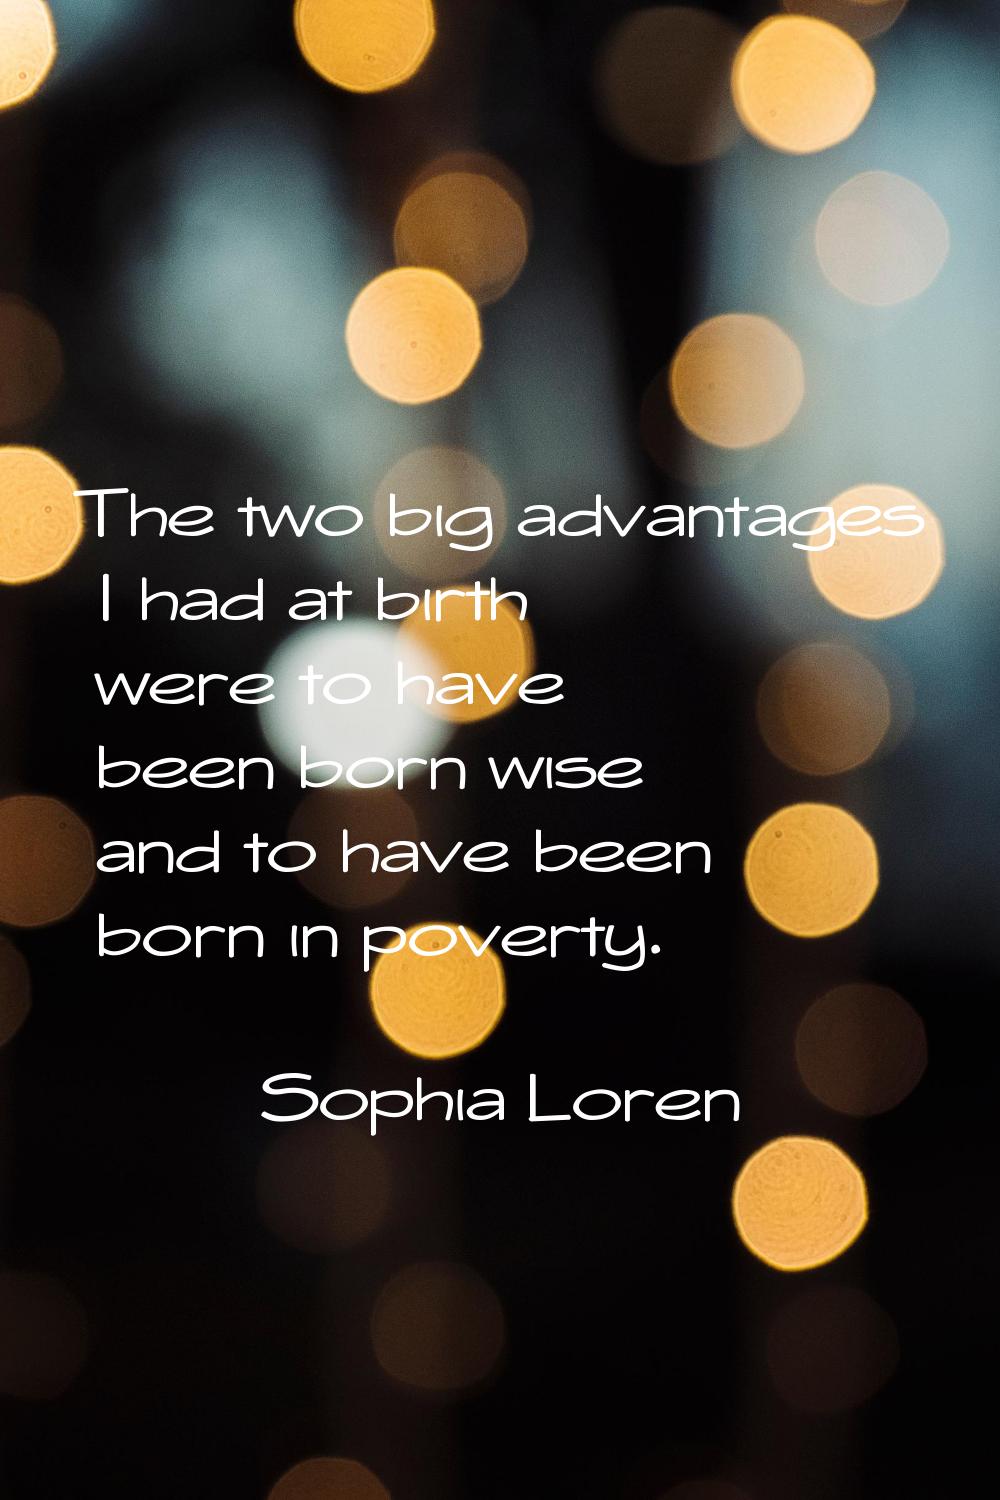 The two big advantages I had at birth were to have been born wise and to have been born in poverty.